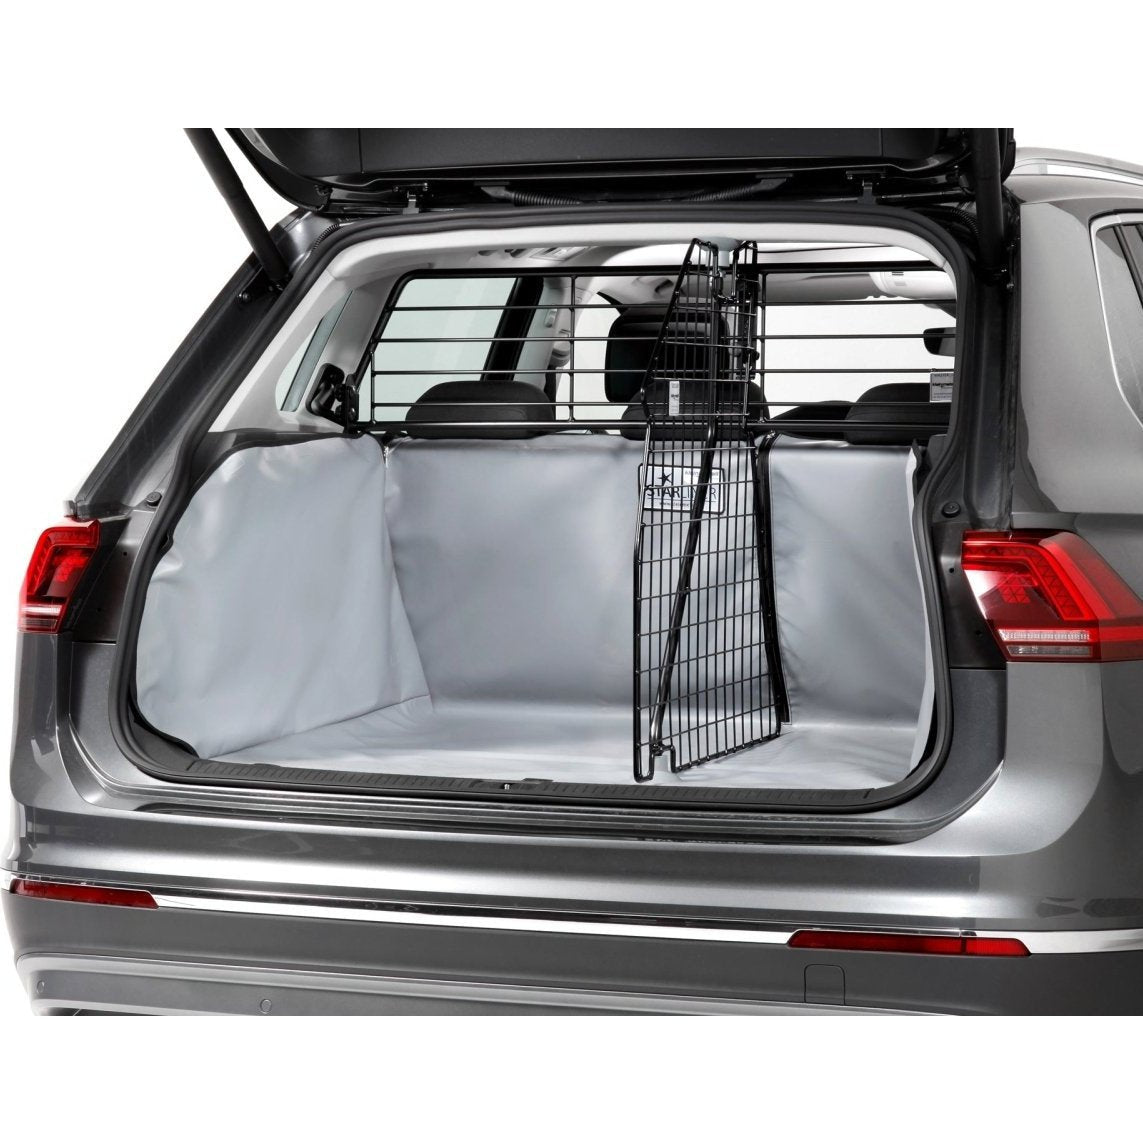 Kleinmetall trunk liner for VW Tiguan II (with various loading trays, –